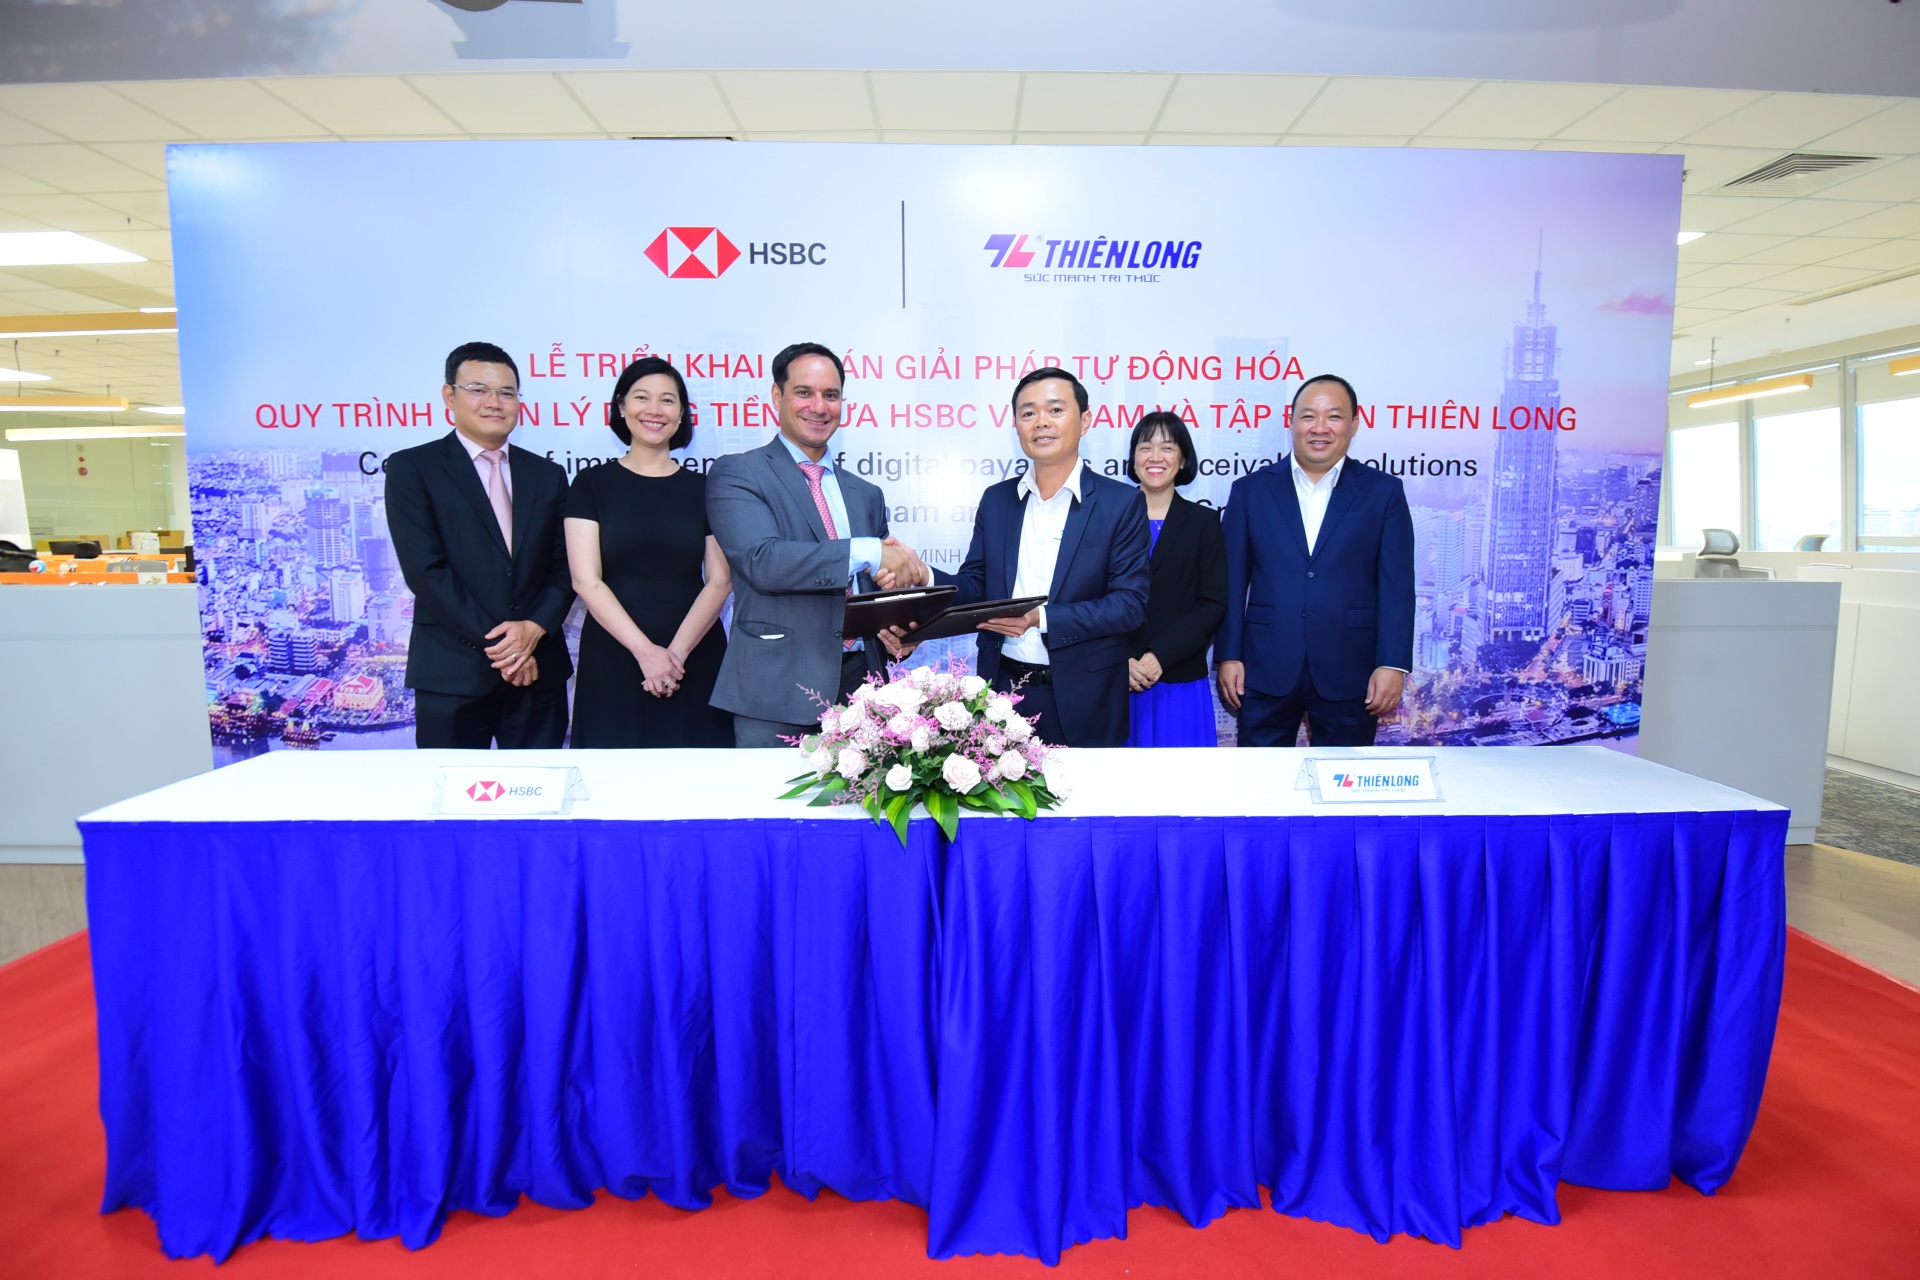 Thien Long partners with HSBC on digitalisiation